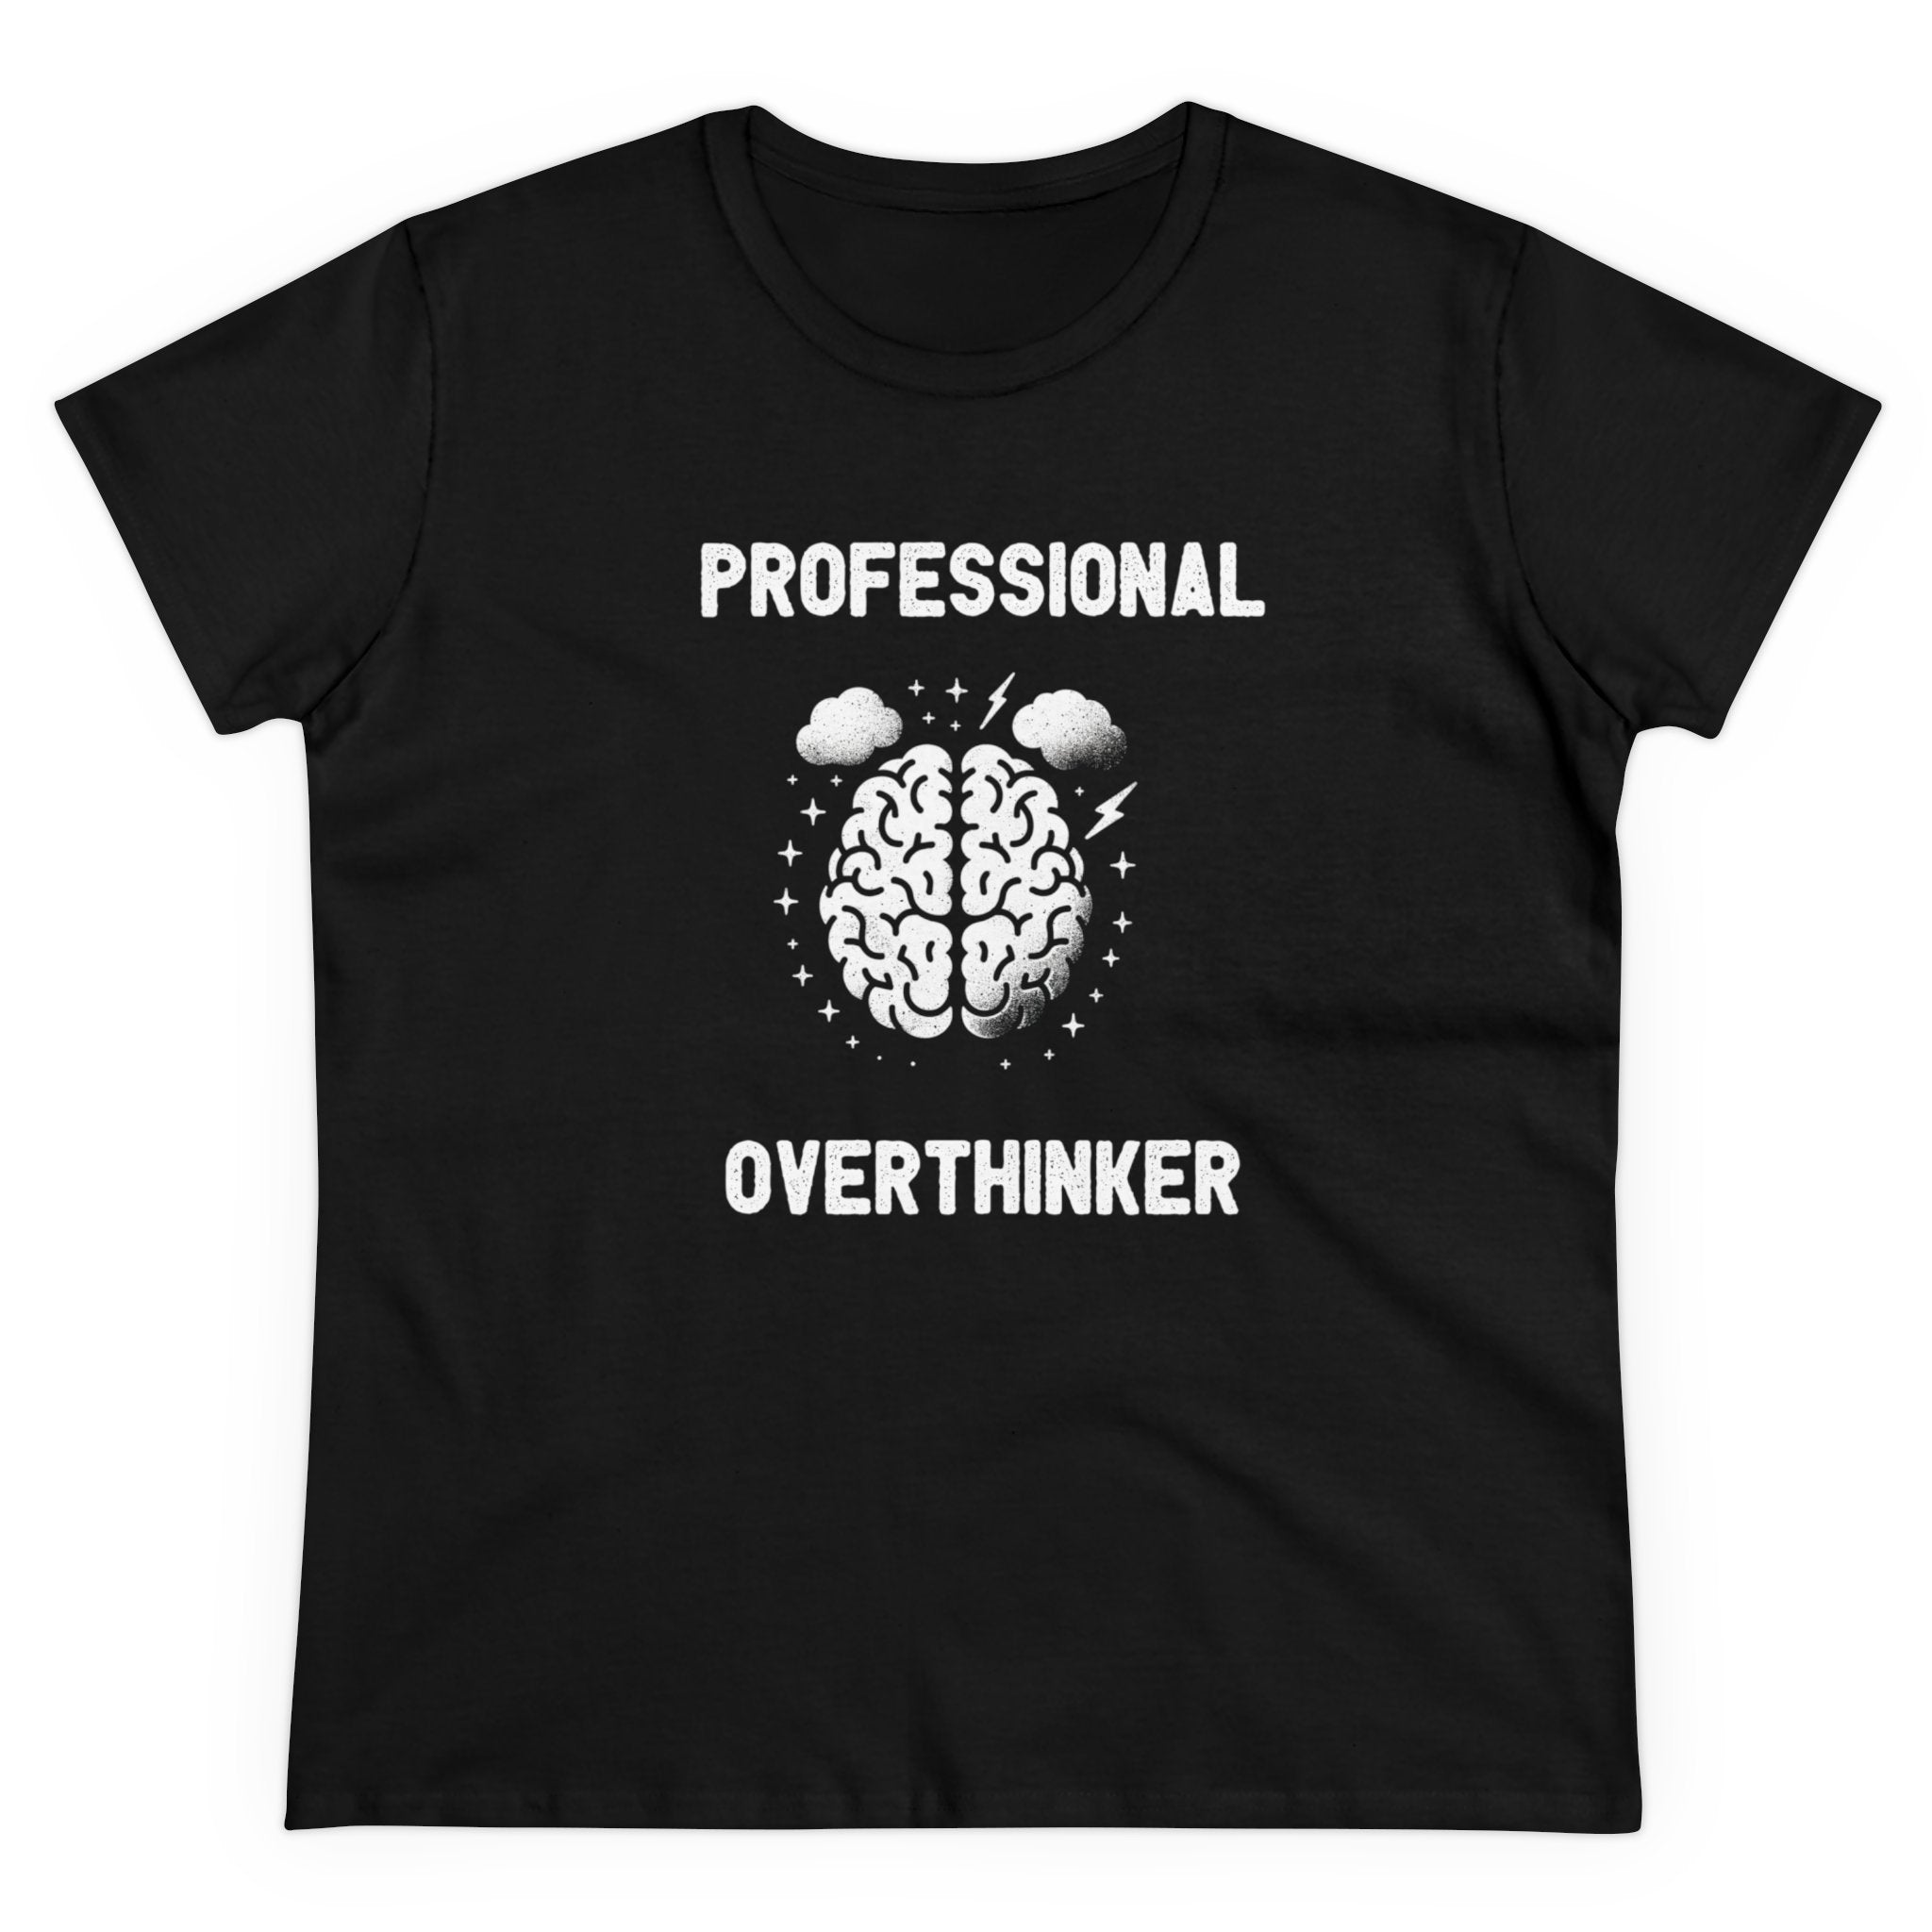 Black women's tee with white text "Professional Overthinker" above and below a detailed brain graphic adorned with lightning bolts and clouds. This semi-fitted shirt boasts a unique design perfect for those who embrace their overthinking nature in style. Introducing the Professional Overthinker - Women's Tee.